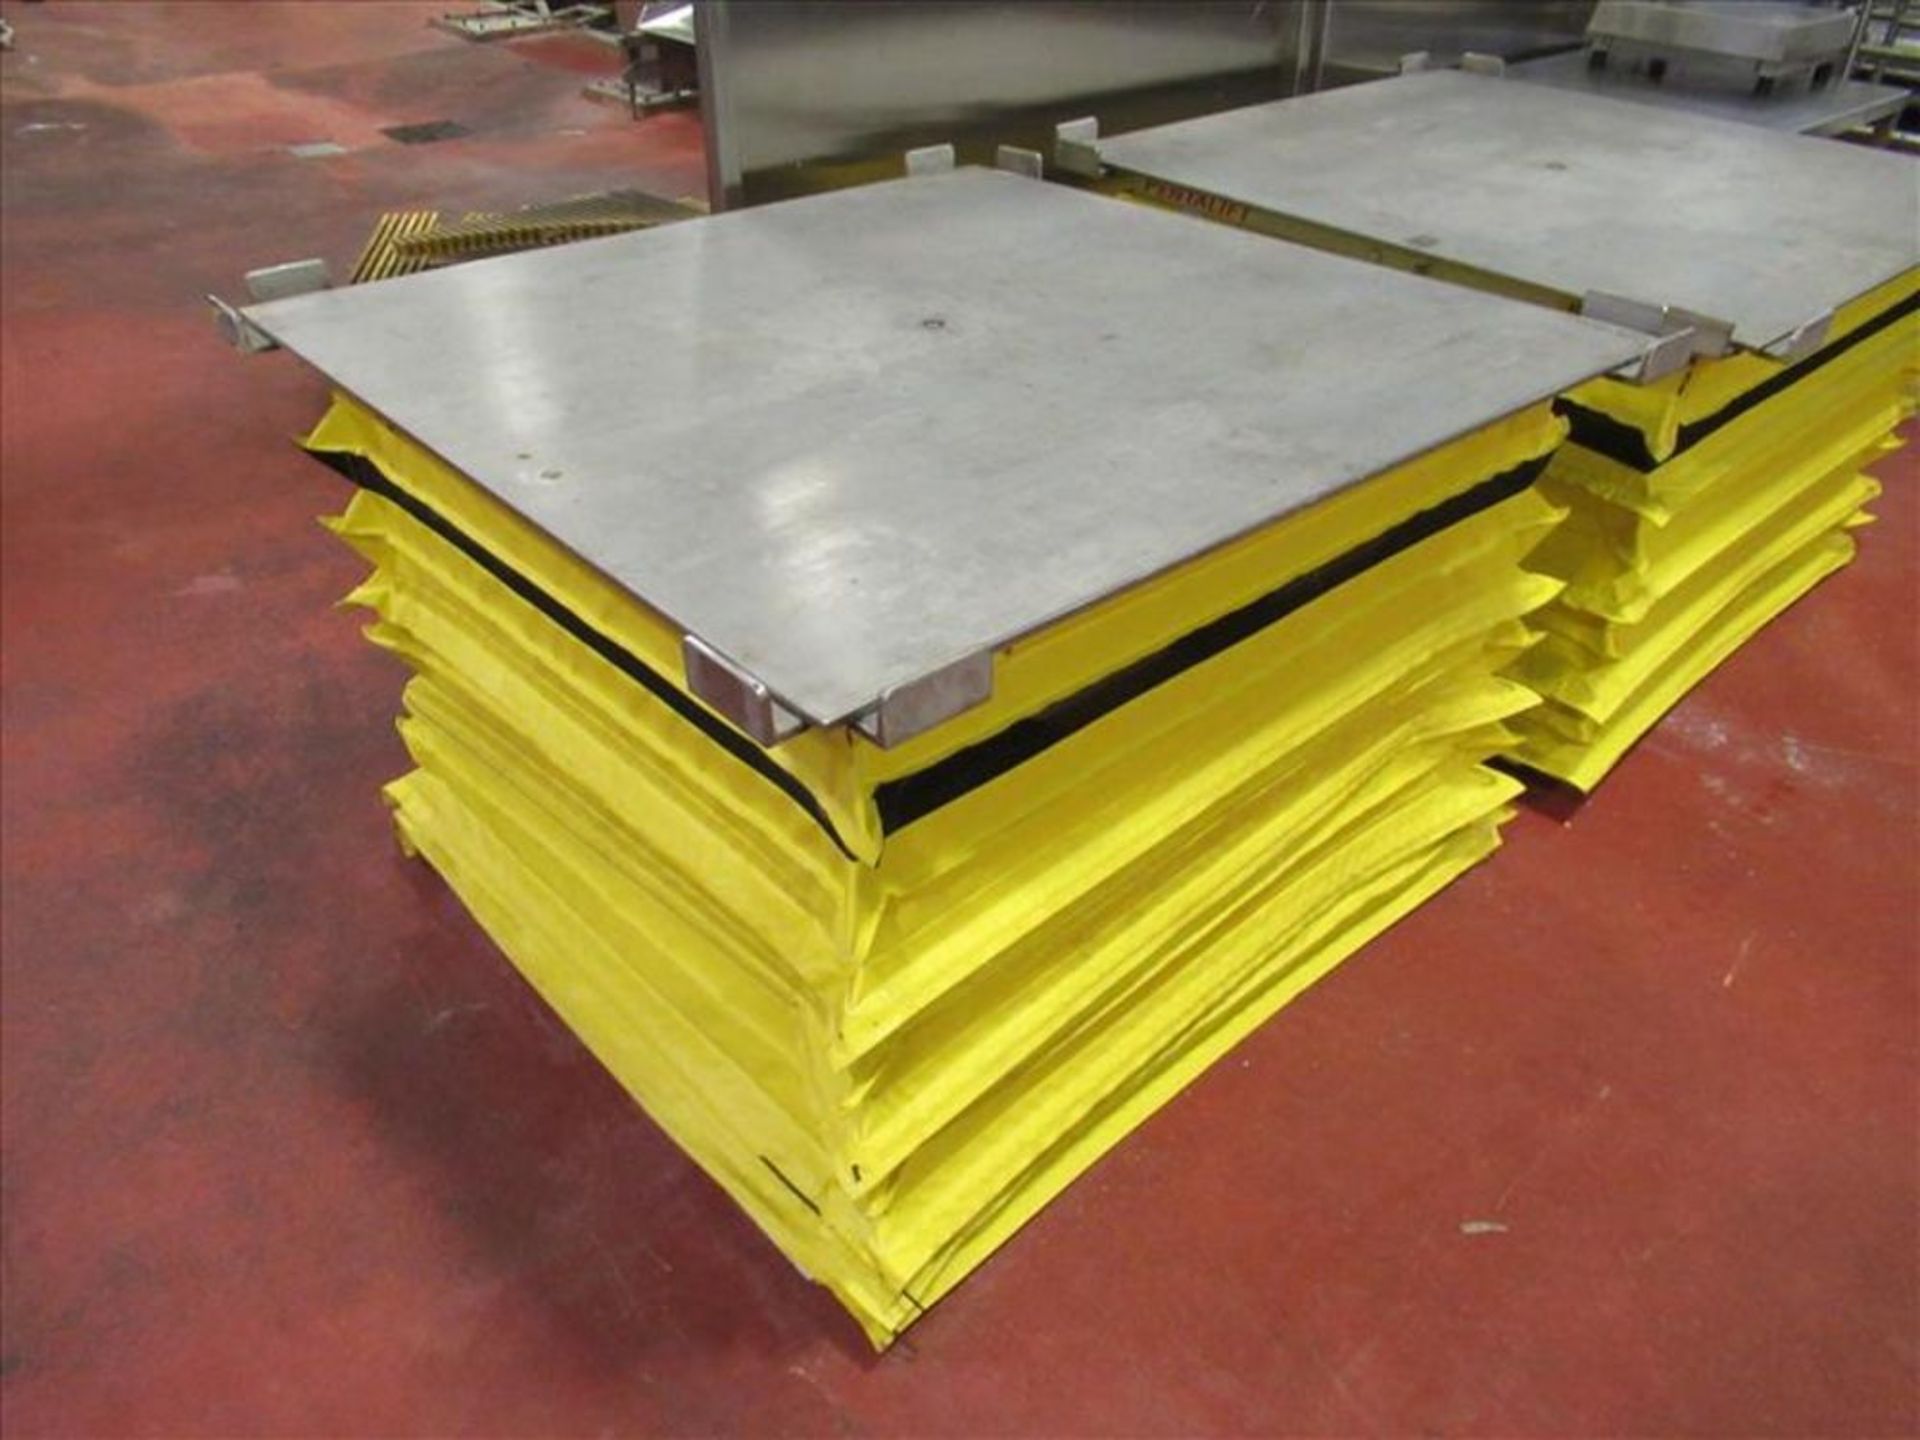 Pentalift Scissor pallet lift table hydraulic, self leveling 48 in. x48 in. [Cooking and Blending